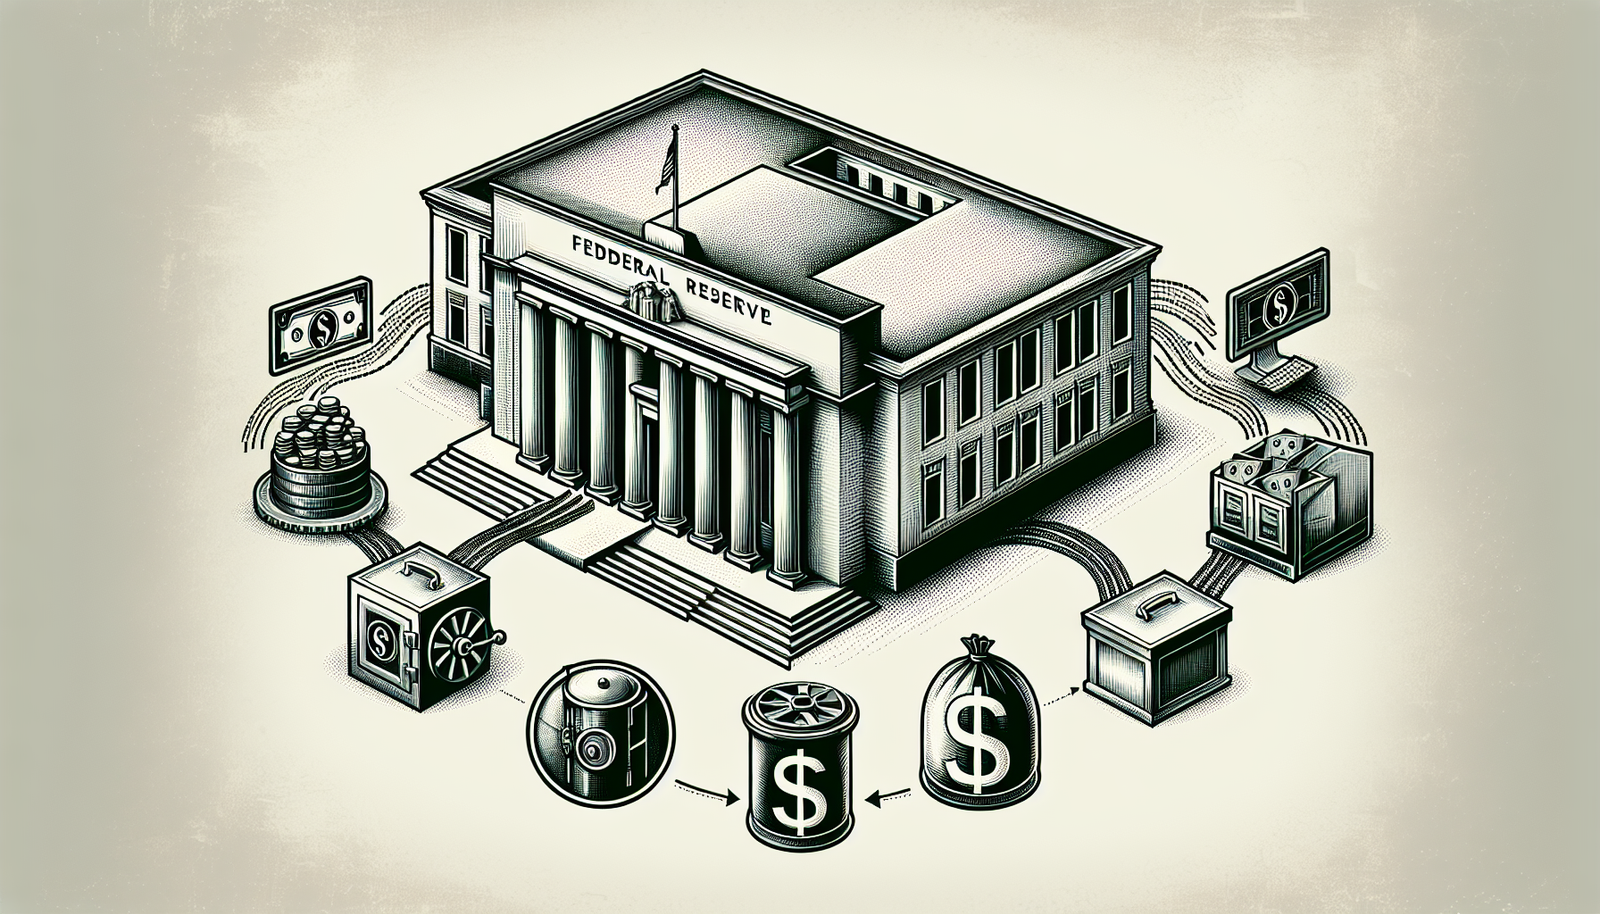 Bank Loans From The Federal Reserve Are Called ________ And Represent A ________ Of Funds